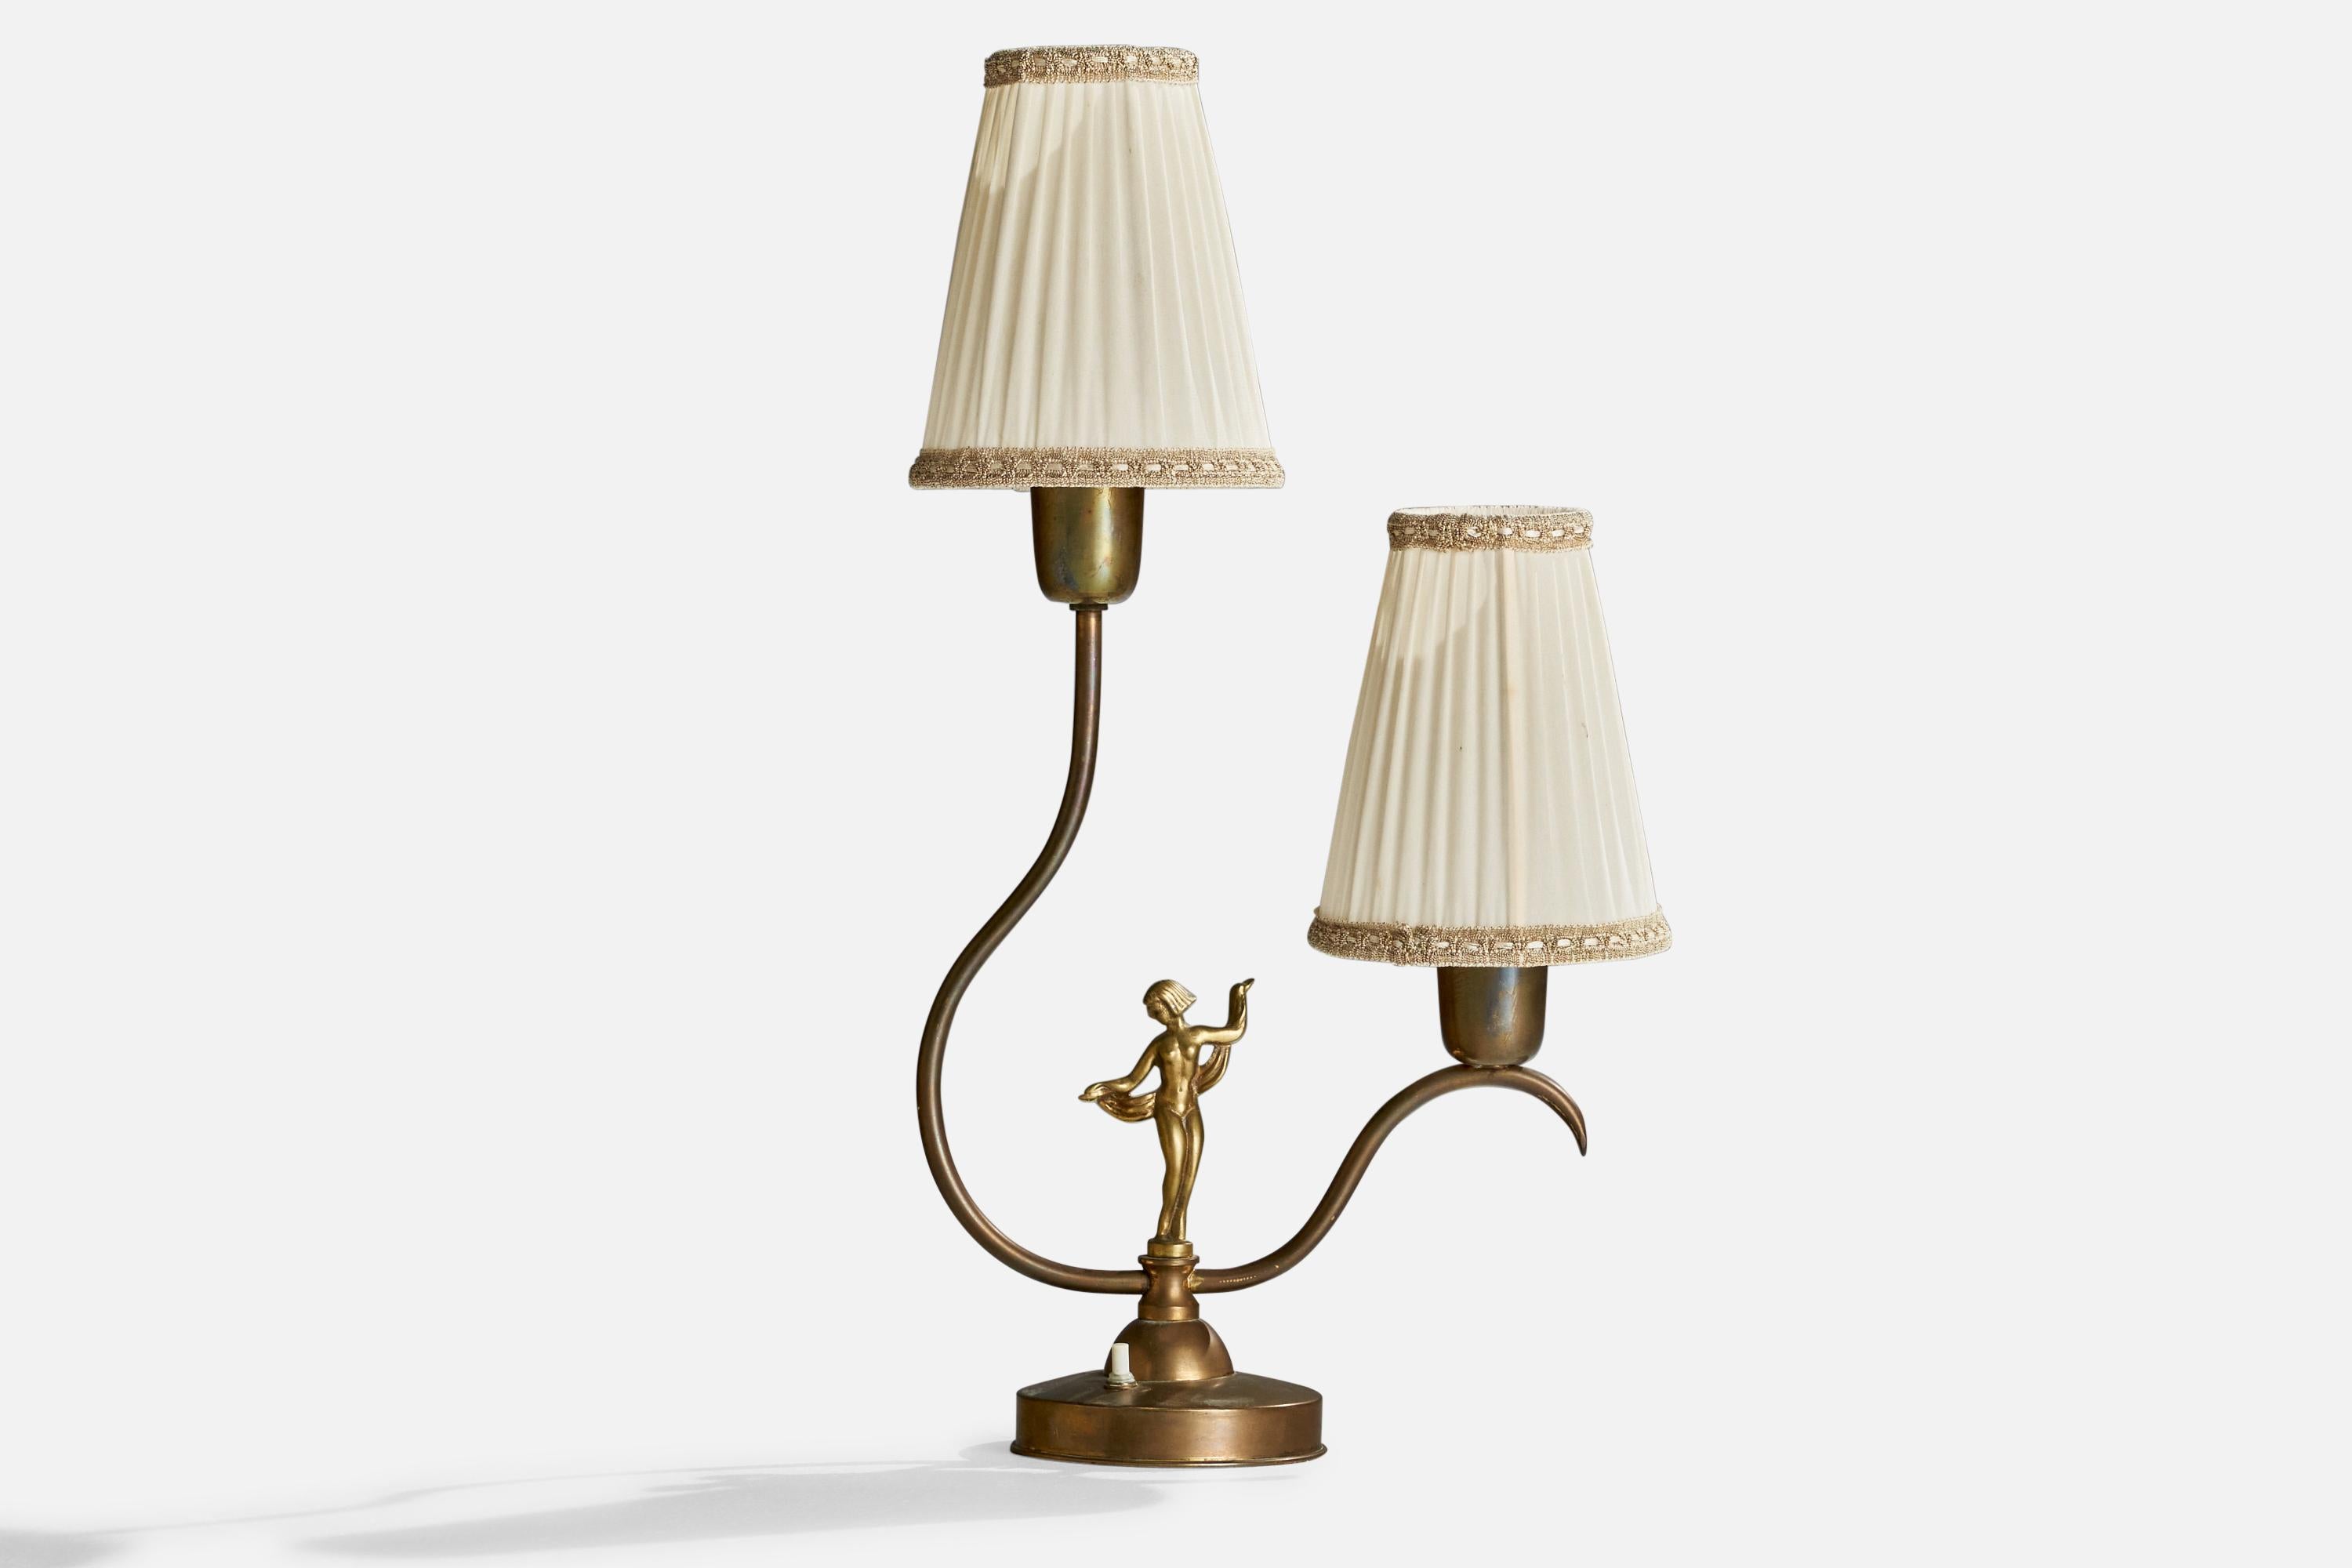 A brass and off-white fabric table lamp designed and produced in Sweden, c. 1930s.

Overall Dimensions (inches): 20.25” H x 11” W x 5.25” D
Stated dimensions include shades
Bulb Specifications: E-26 Bulb
Number of Sockets: 2
All lighting will be